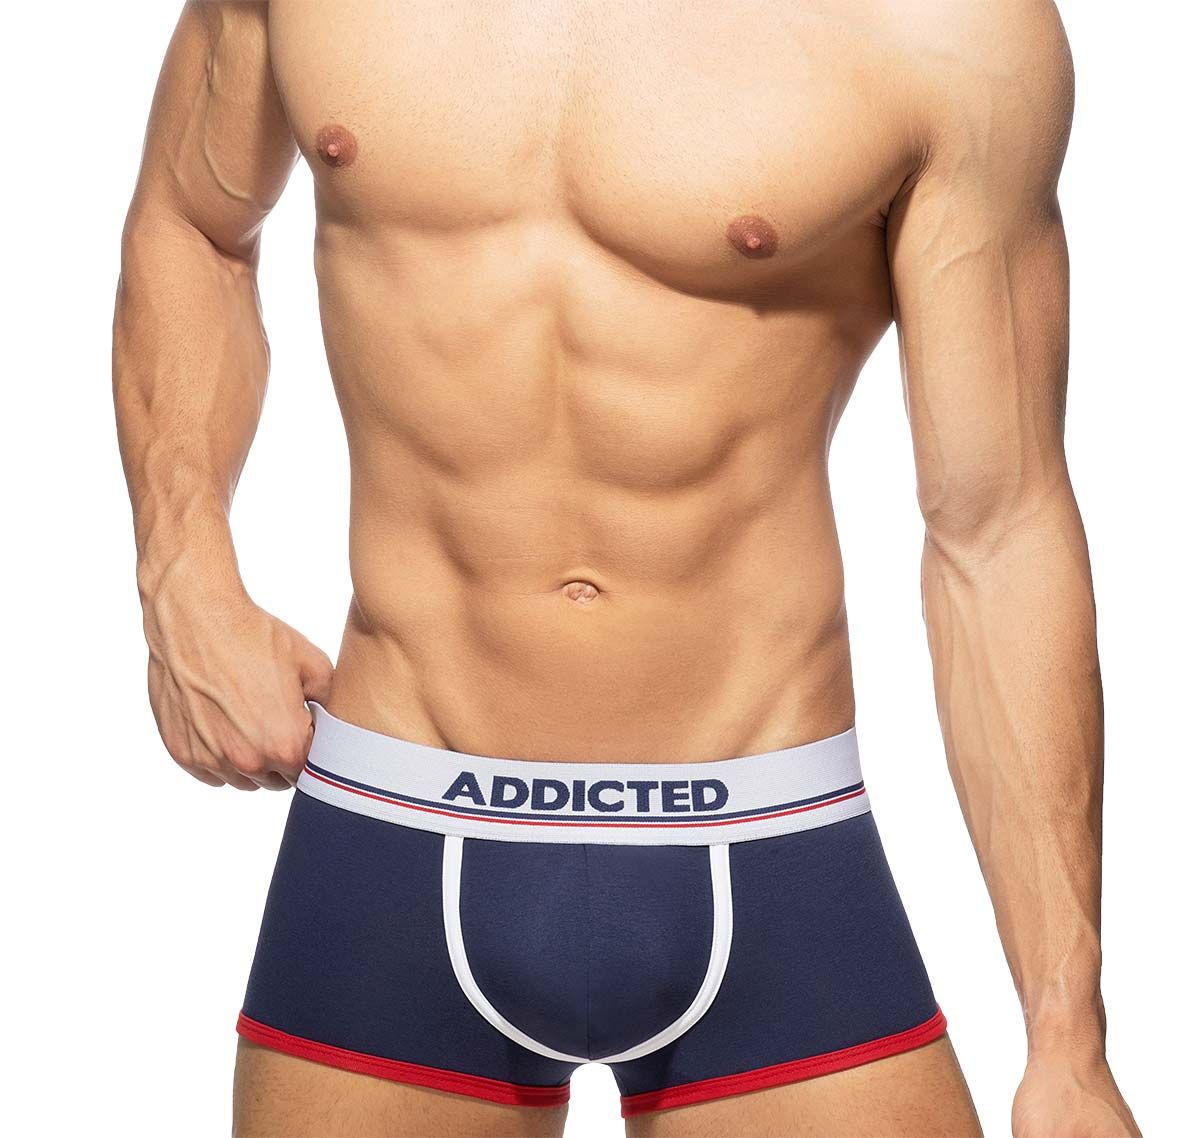 Addicted Pack de 3 Bóxers TOMMY 3 PACK TRUNK AD1009P, blanco/rojo/azul marino